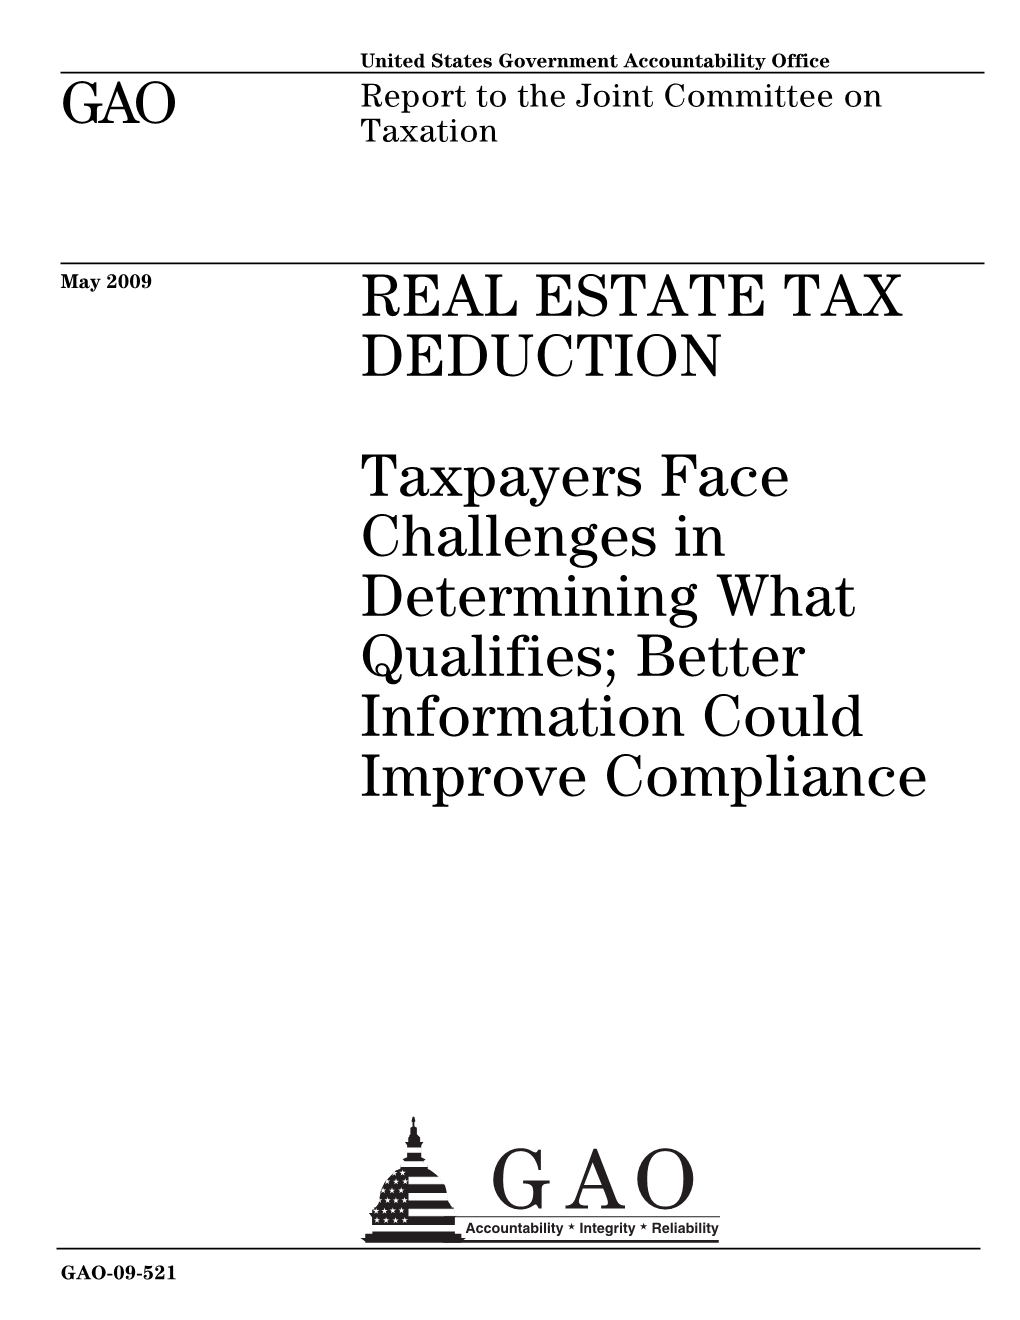 GAO-09-521 Real Estate Tax Deduction